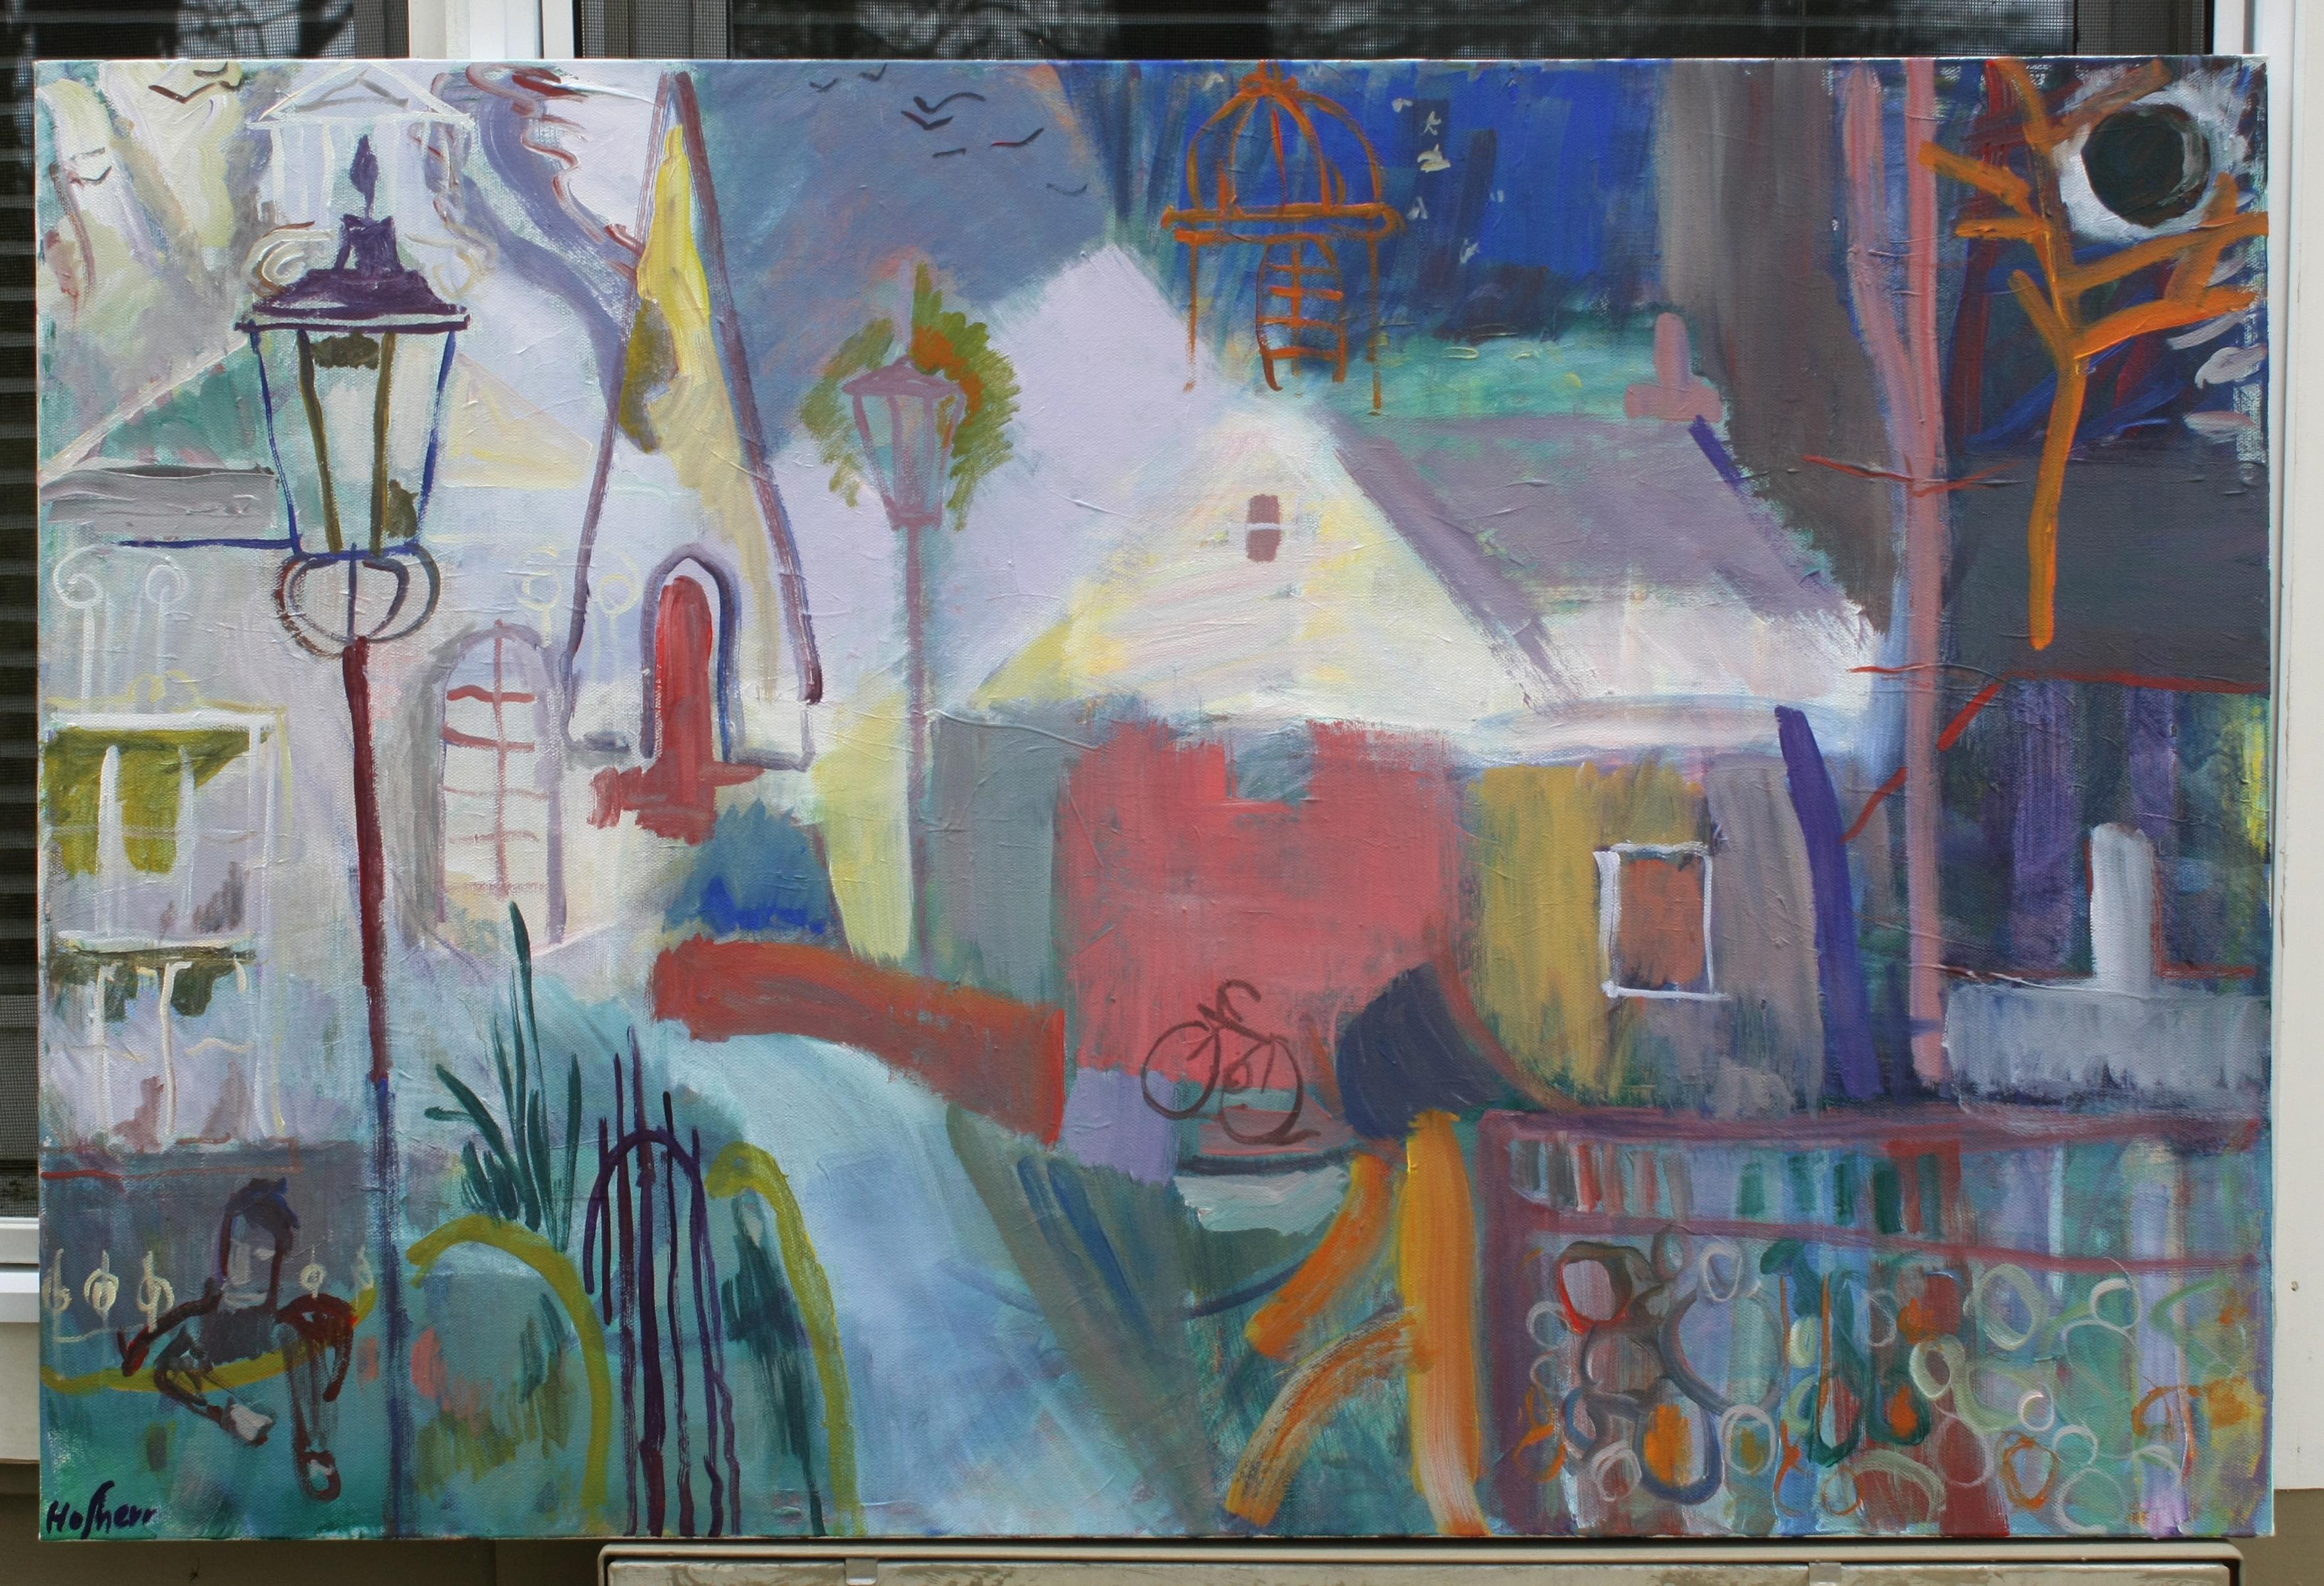 <p>Artist Comments<br>A town exudes a whimsical charm with its expressionist portrayal. The simple and non-traditional images of the houses, lamp posts, and residents burst with muted and vibrant colors and shapes. When hanging the artwork, soft